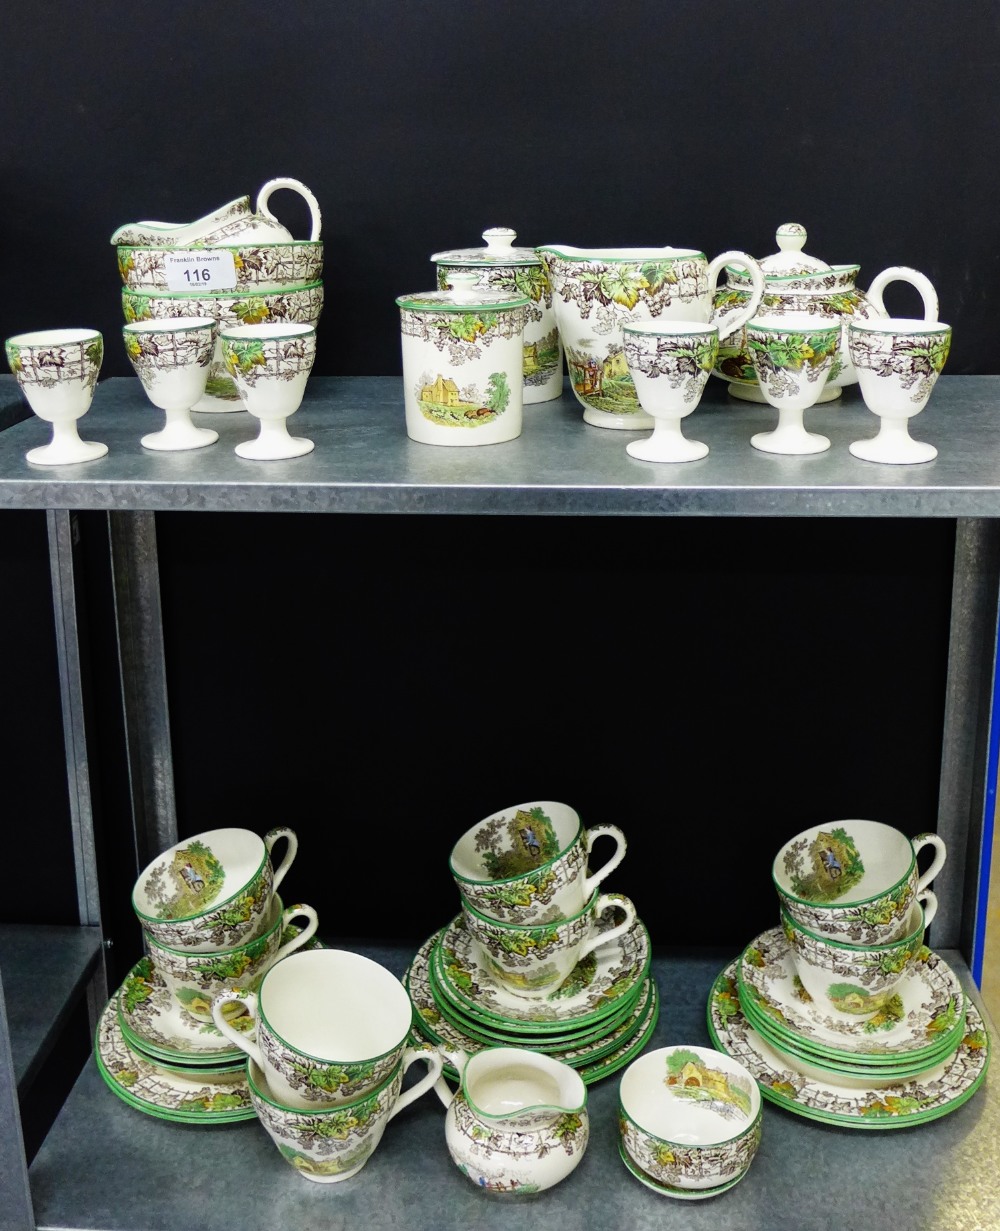 Quantity of Copeland Spode's Byron table wares to include cups, saucers, side plates, teapot, egg